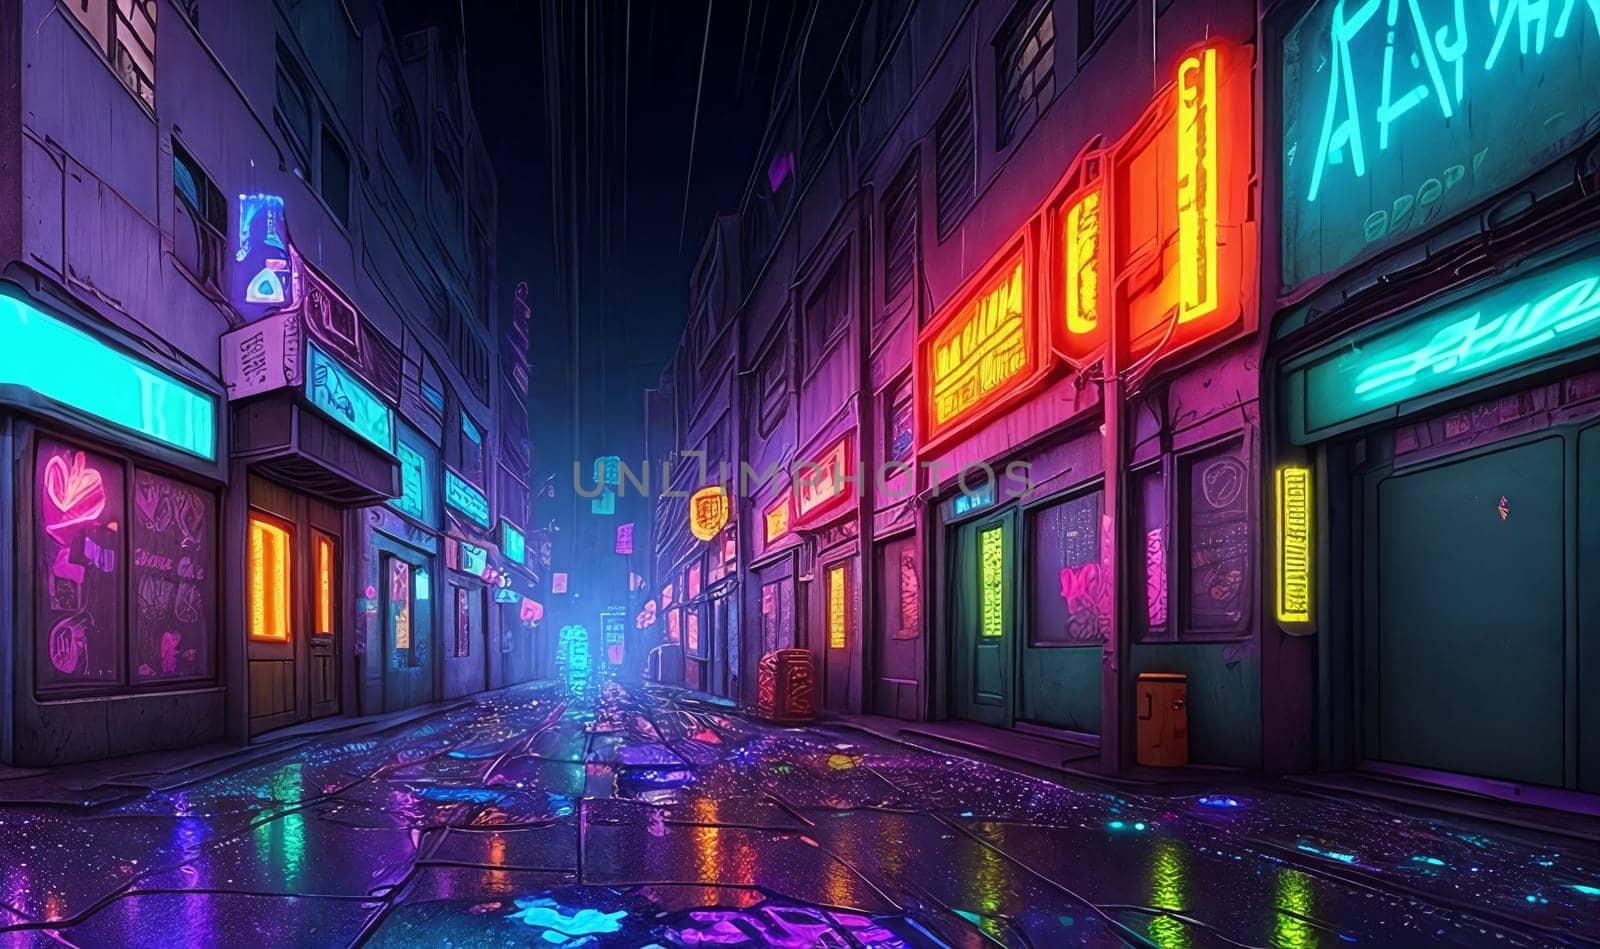 In a cyberpunk alley, neon signs cast a gritty glow on holographic graffiti, rain-soaked pavement glistens under ominous skies.